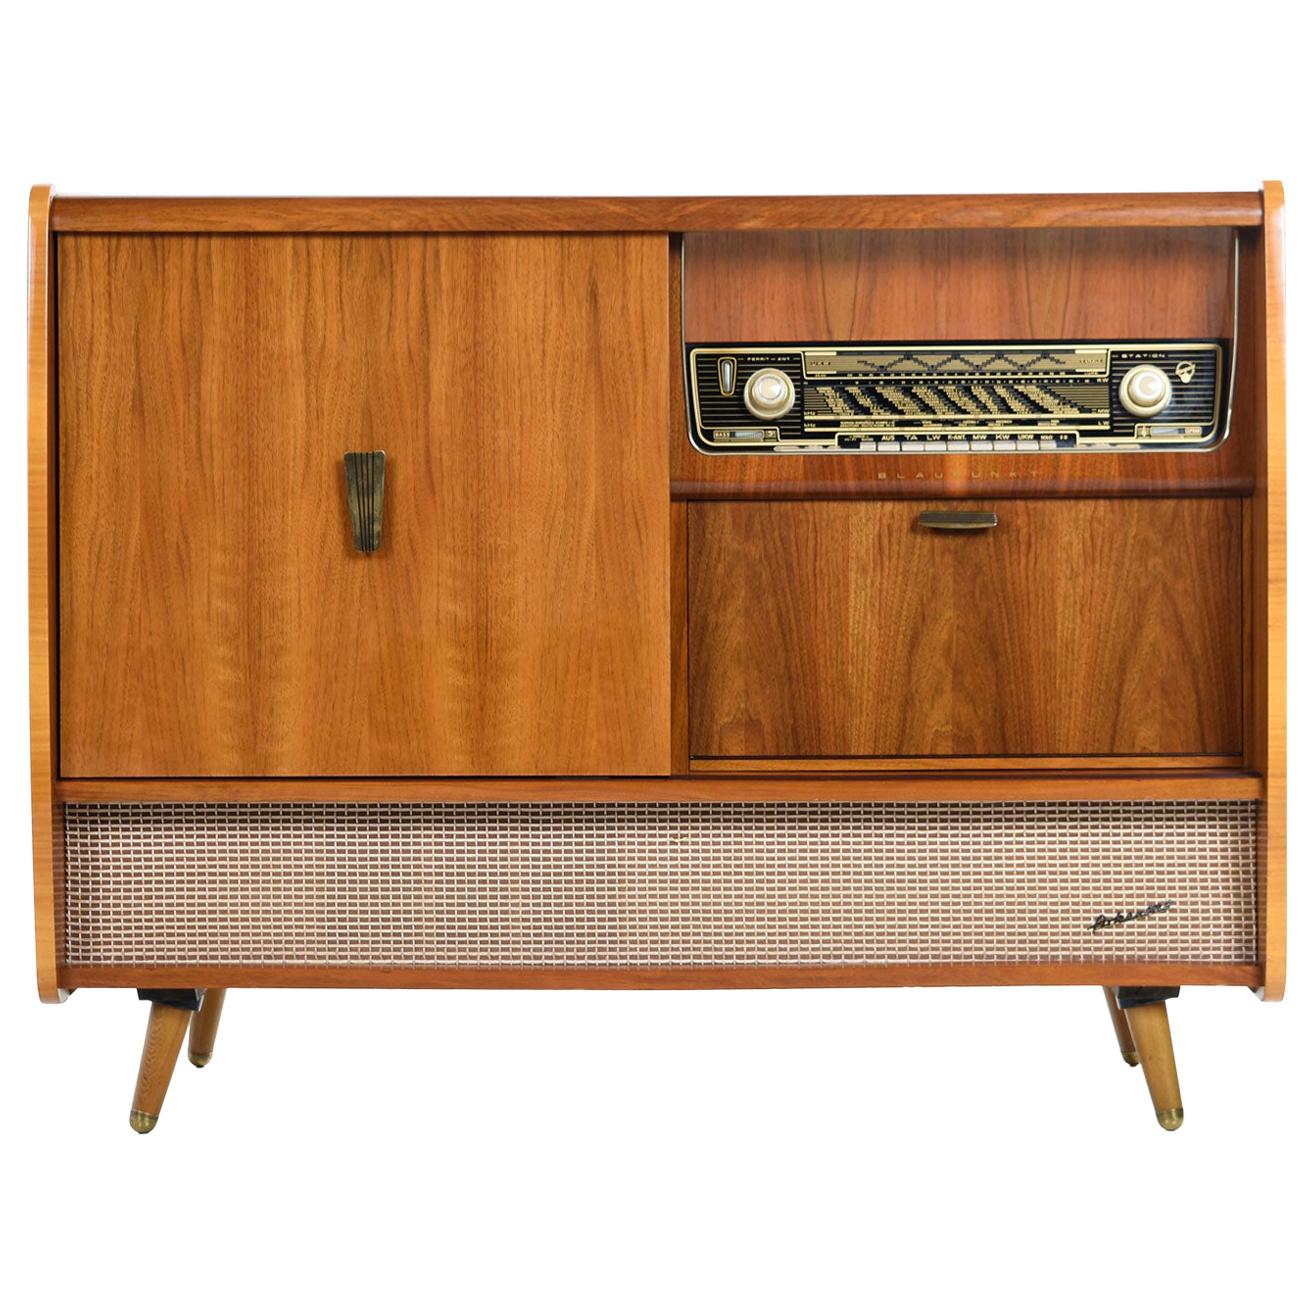 This handsome marvel of German engineering is the Arkansas 59 by Blaupunkt. The Mid-Century Modern HiFi tube stereo features AM/FM and shortwave radio along with a turn table for records. The radio is working but the record player does not work.